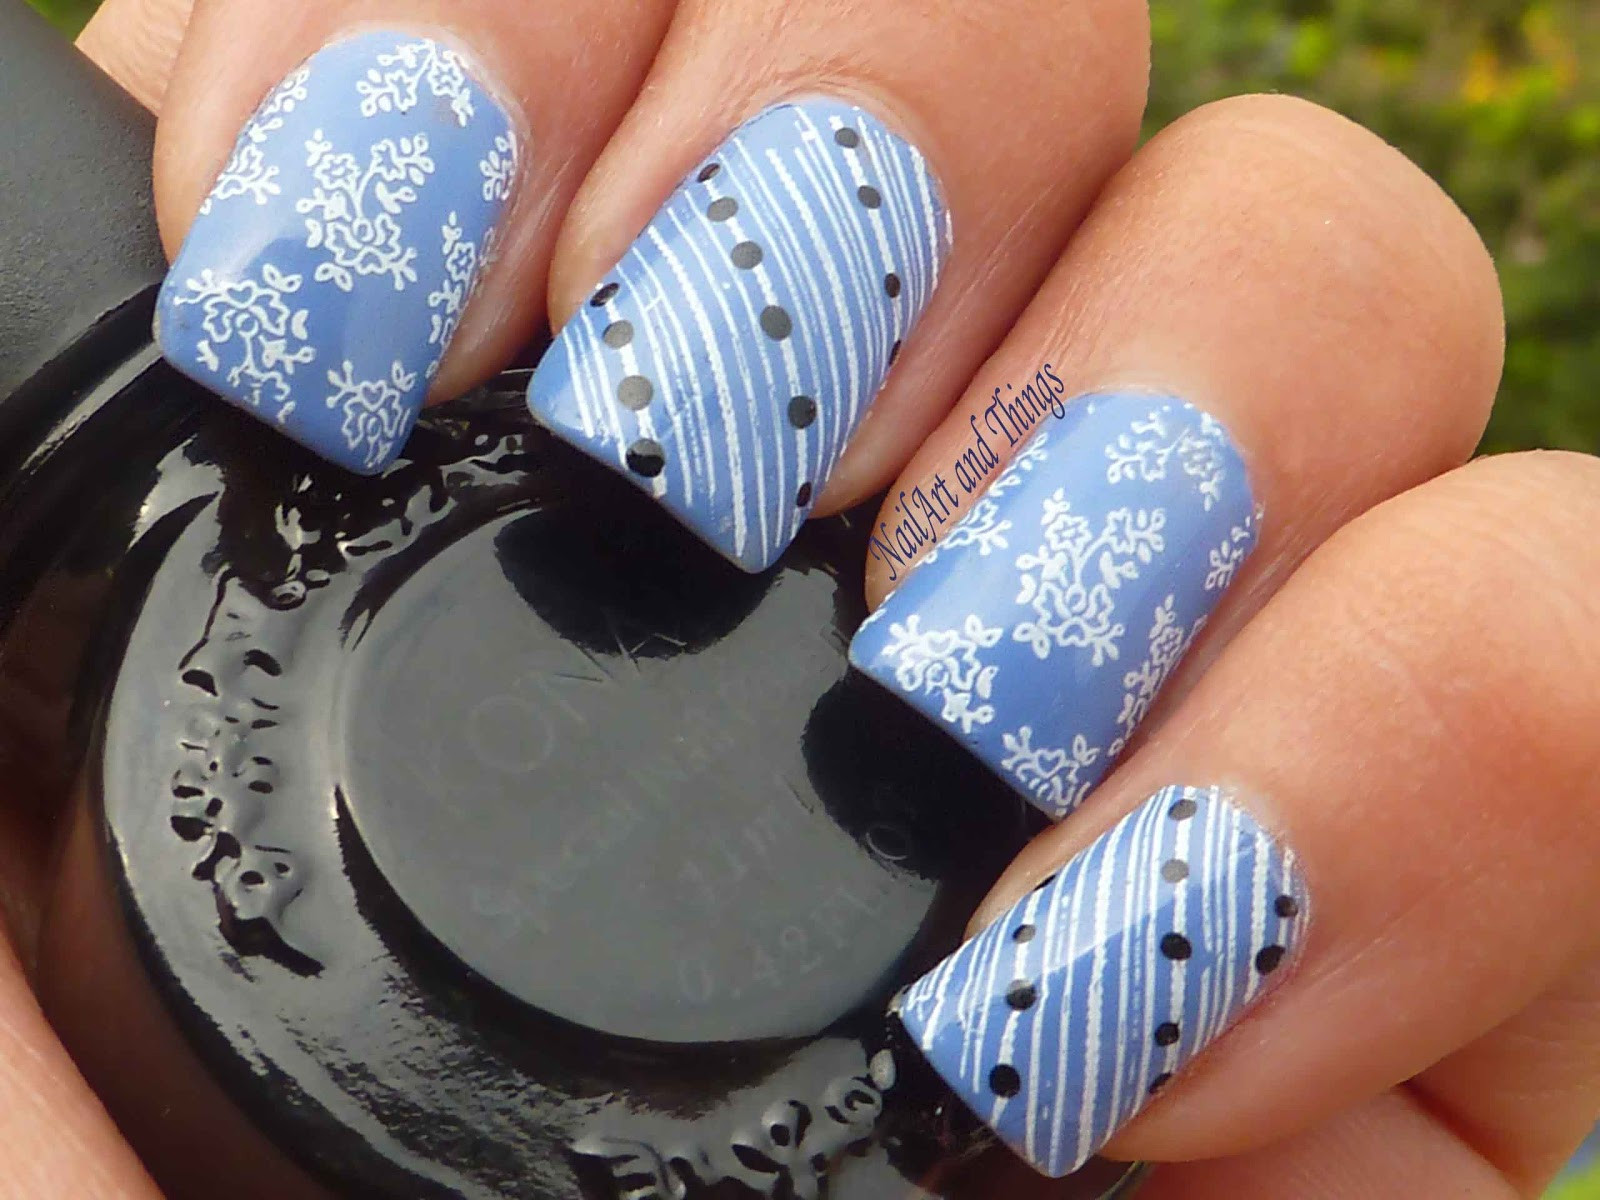 Periwinkle Nail Designs
 NailArt and Things Periwinkle Lace Nail Art